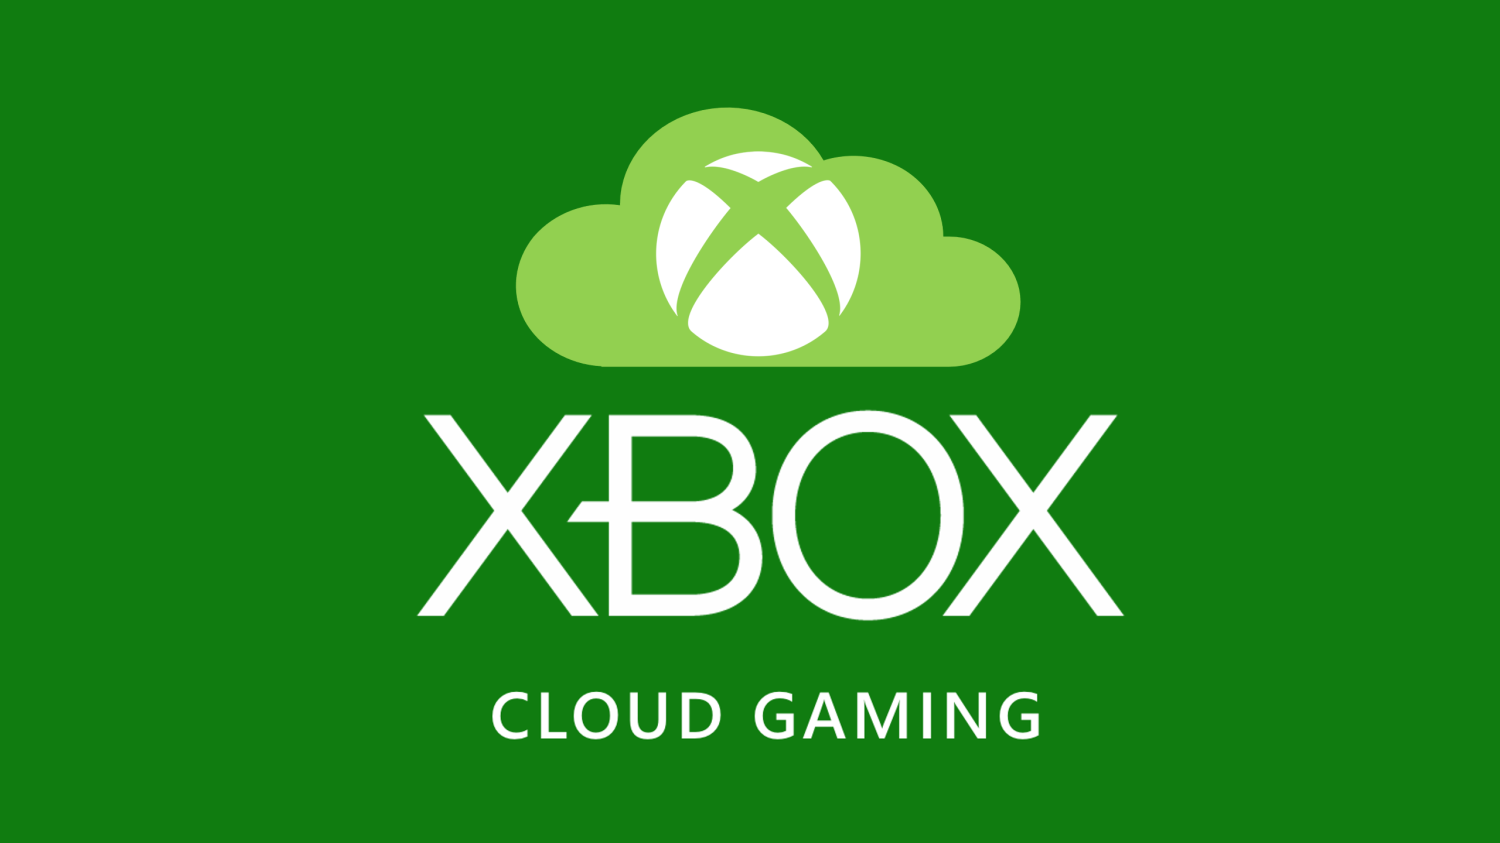 Microsoft is combining Project xCloud and Xbox Game Pass